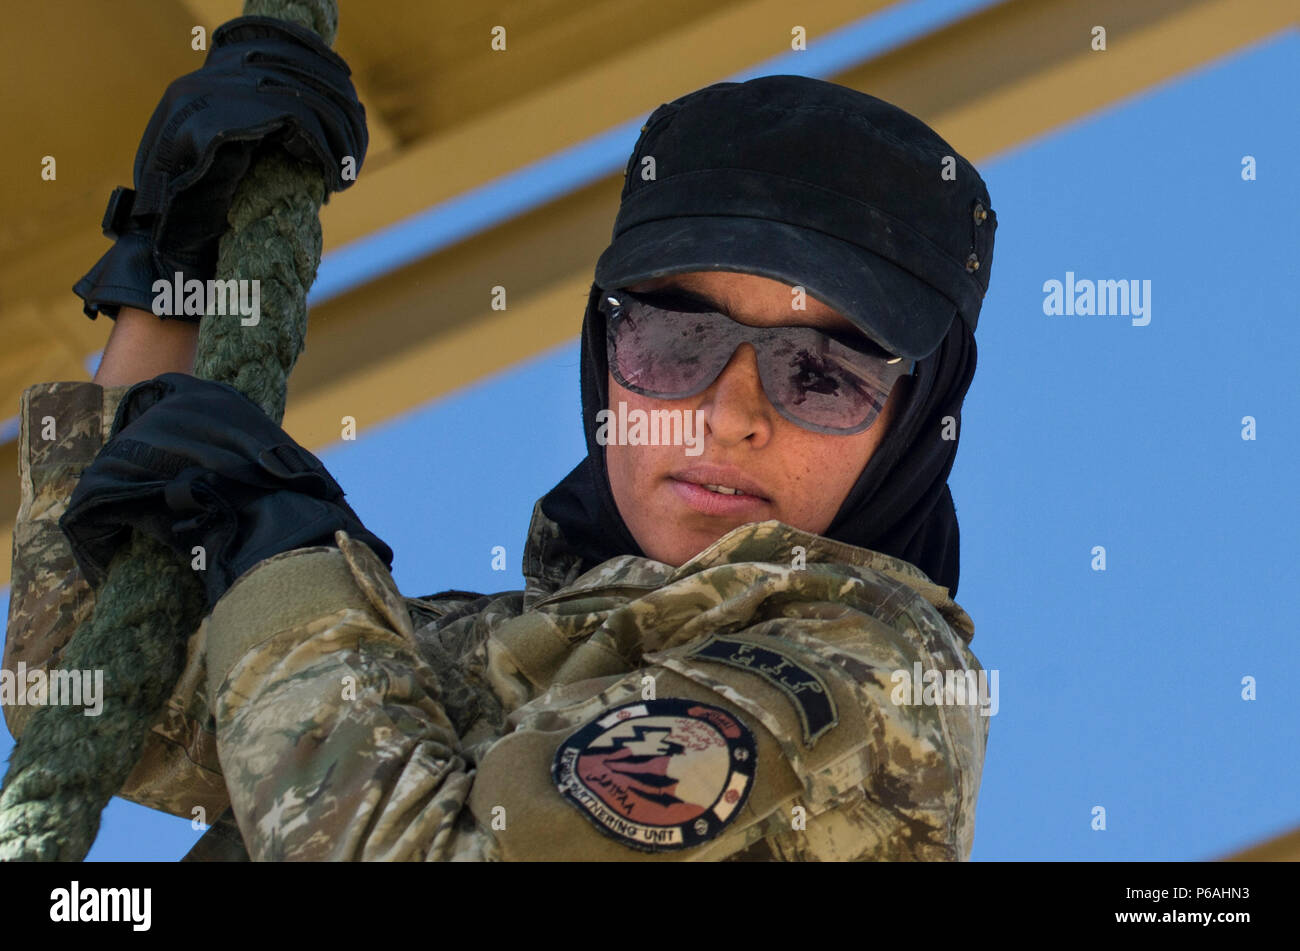 A Ktah Khas Afghan Female Tactical Platoon member participates in a fast roping training drill outside Kabul, Afghanistan May 29, 2016. The females work closely alongside the males on operations to engage and interact with women and children. The FTPs are trained in marksmanship, language, fast roping and other combat-related skills. (U.S. Air Force photo by Staff Sgt. Douglas Ellis/Released) Stock Photo